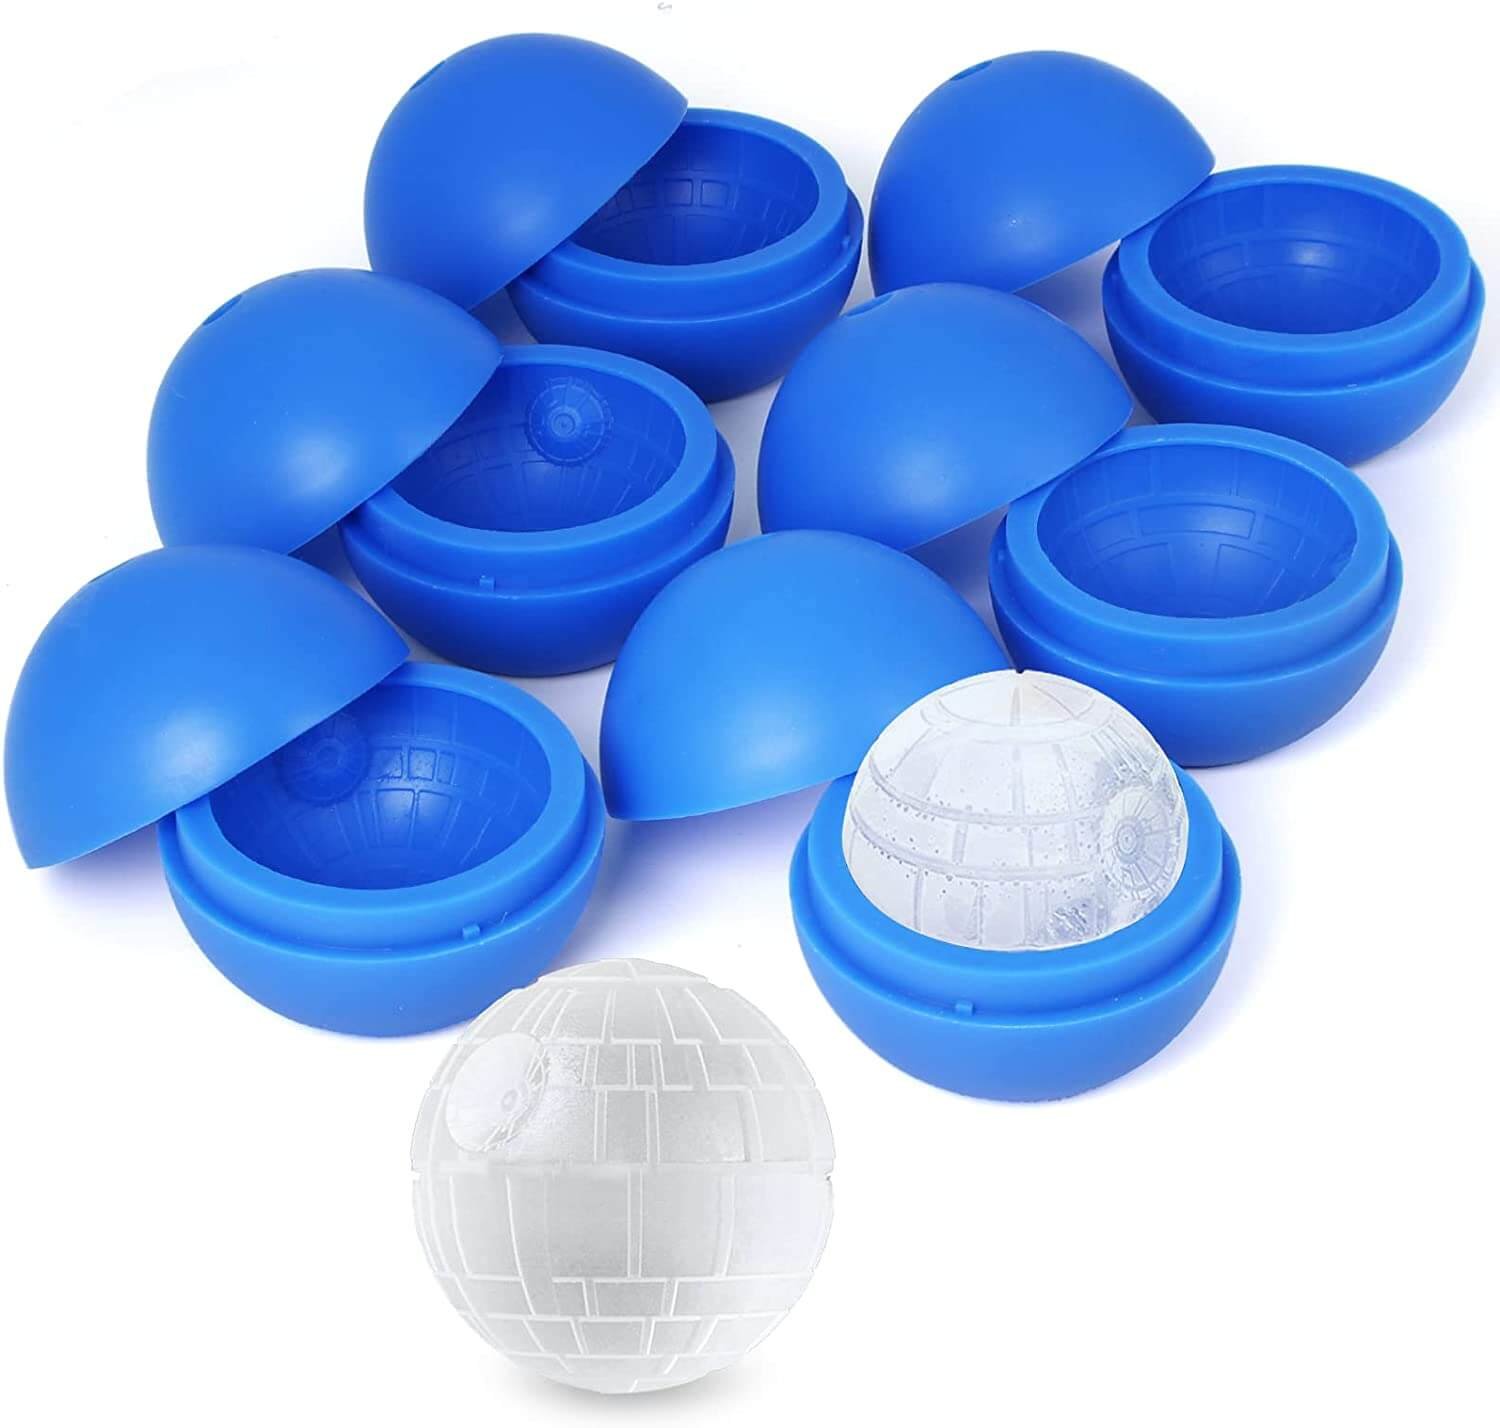 Star Wars Death Star Silicone Ice Mold - China Ice Cube Tray and